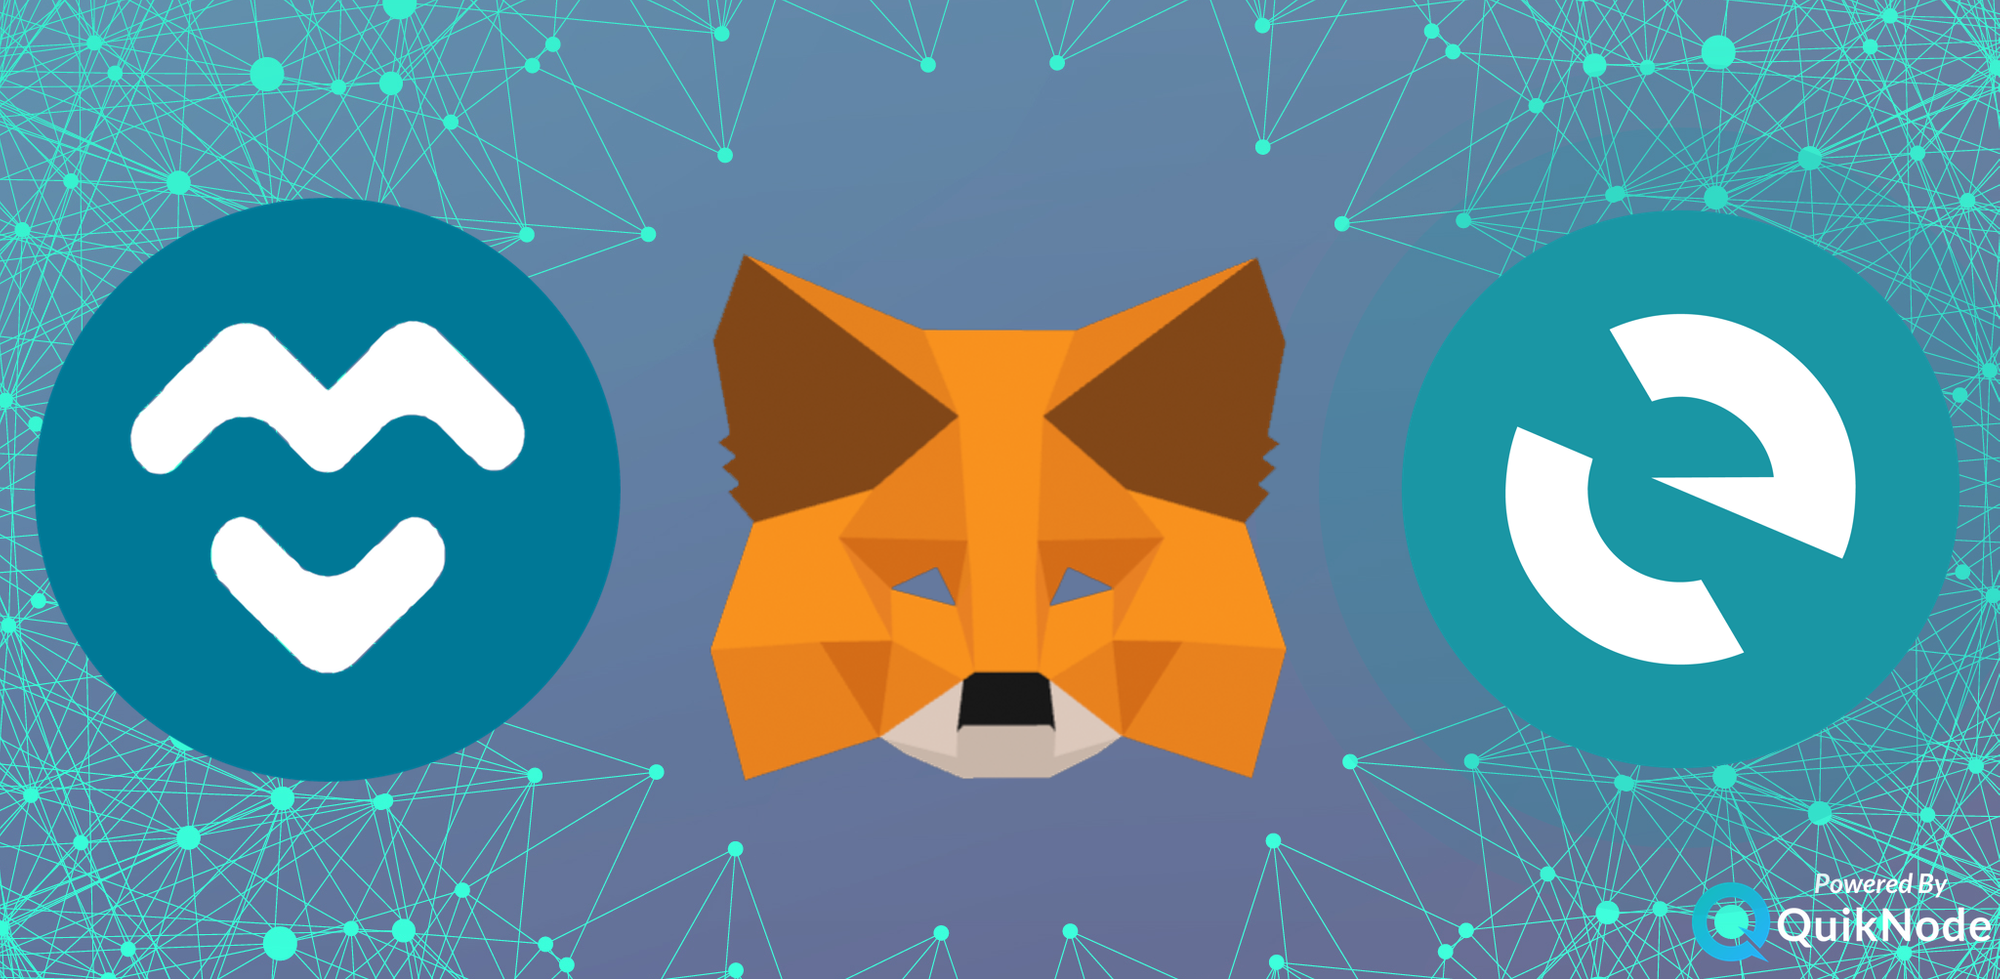 mew with metamask